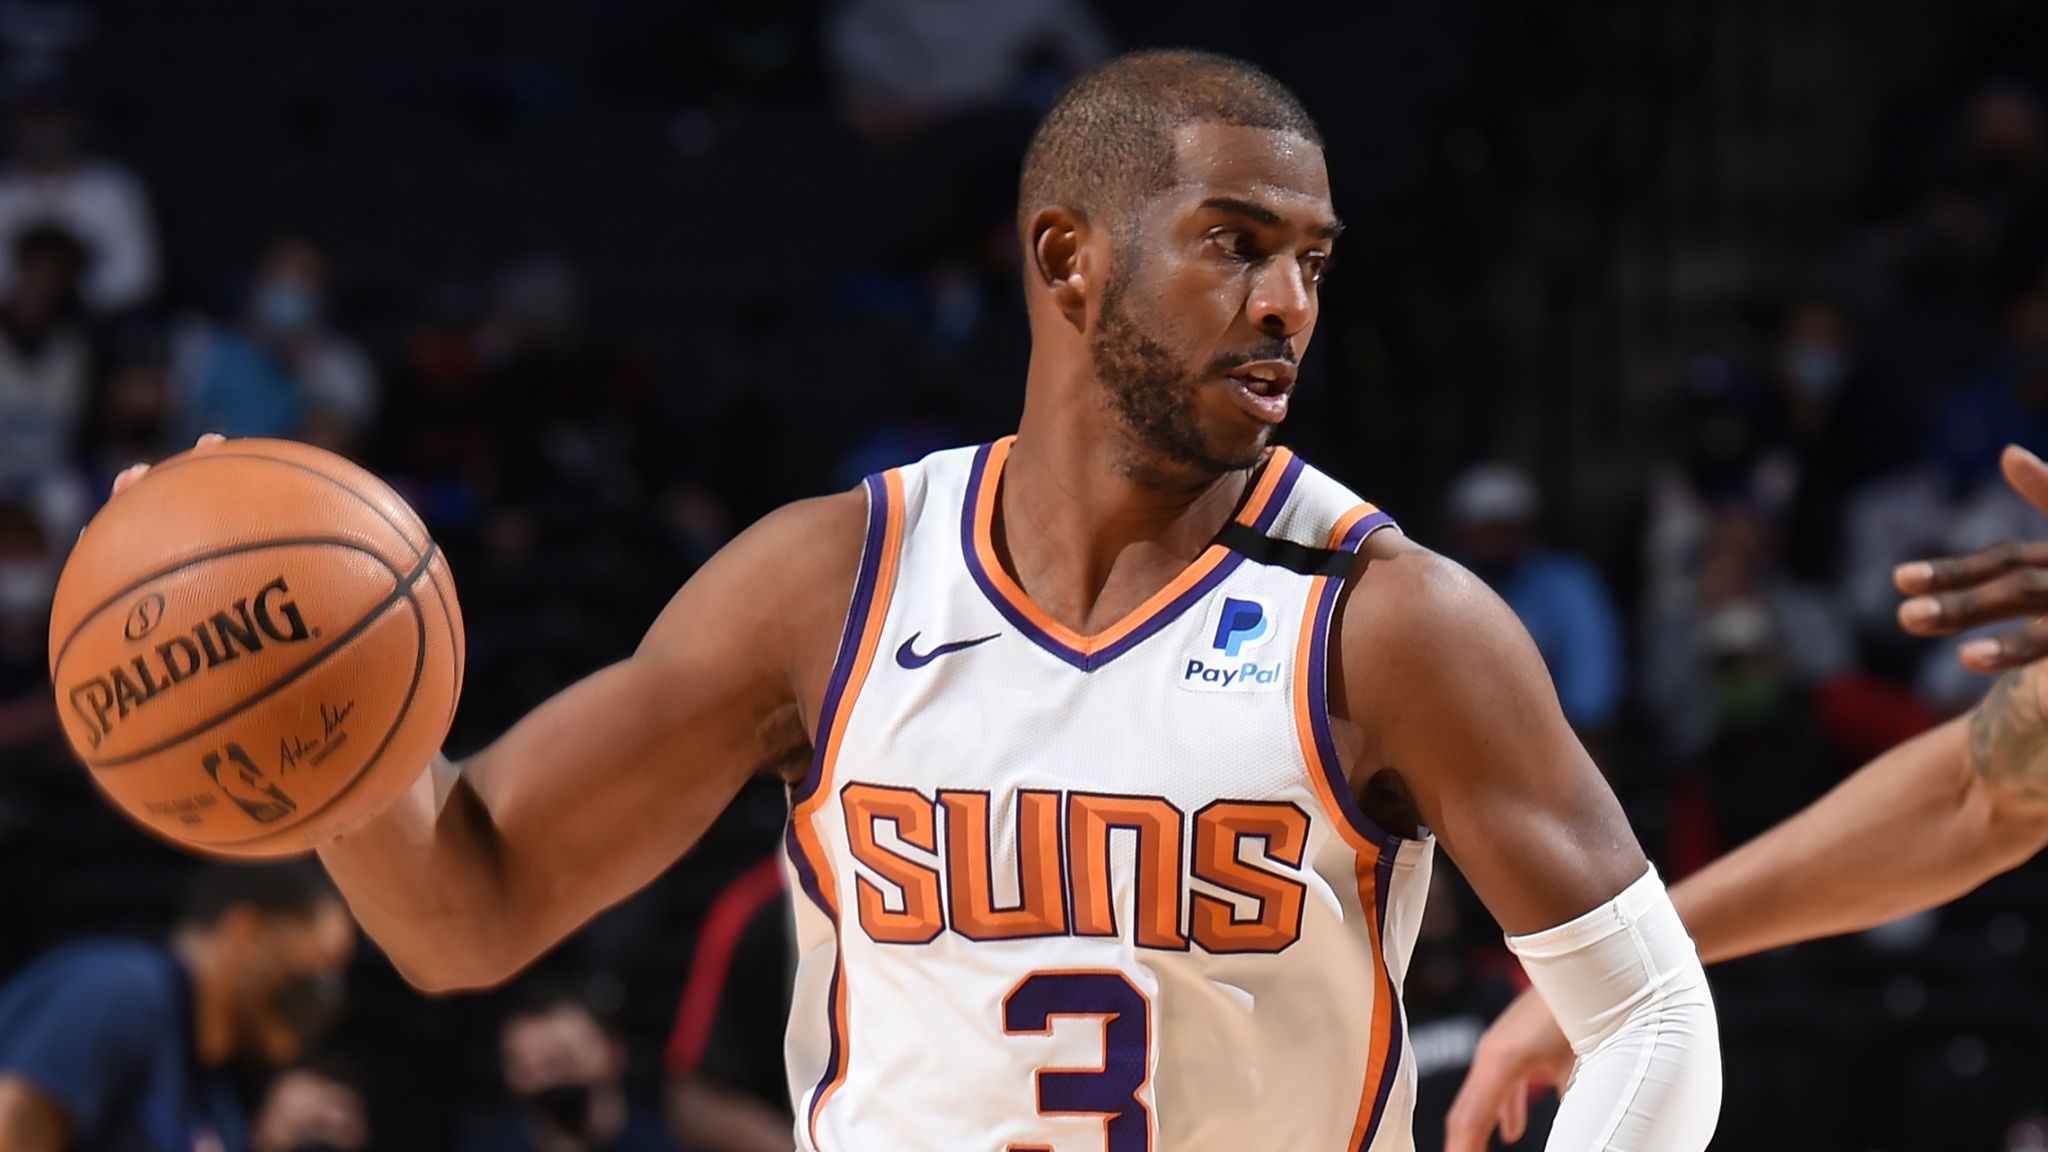 Randle scores 28 points, Brunson has 24 to help lift Knicks over Suns